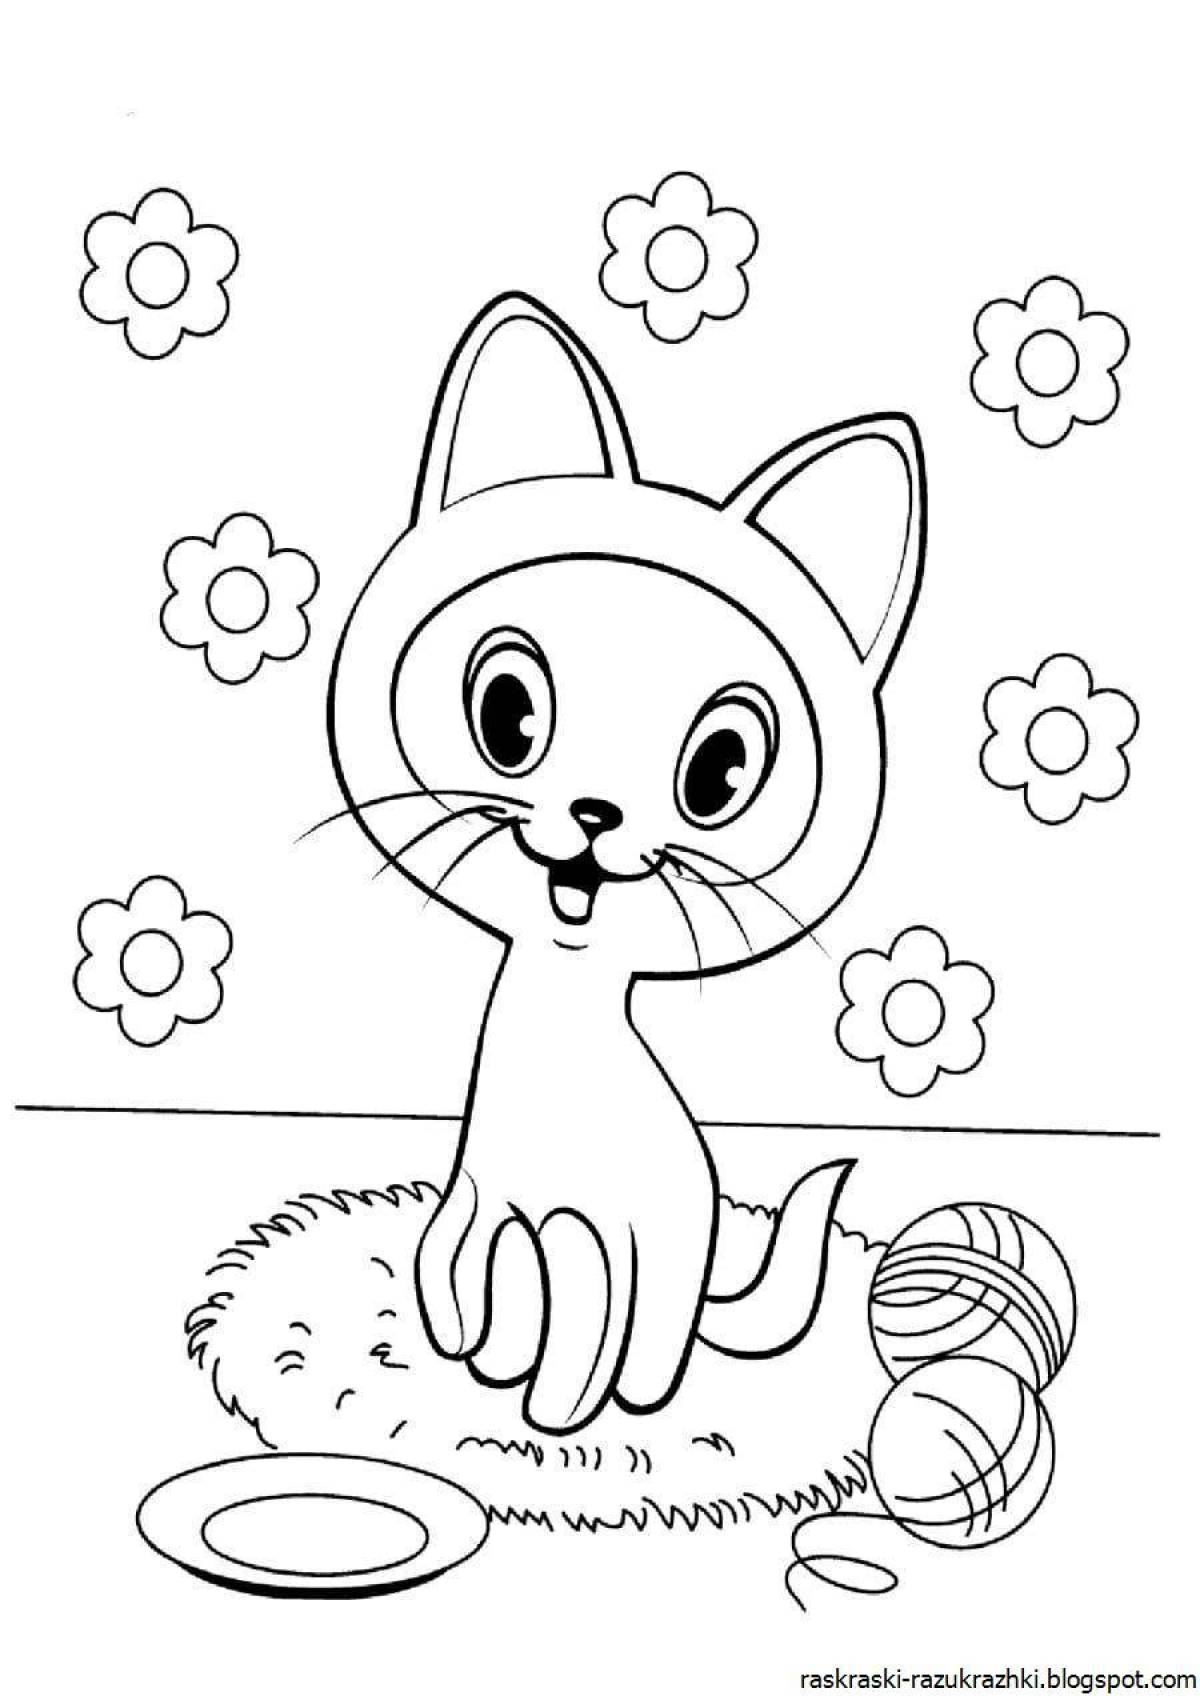 Adorable kitten coloring book for 4-5 year olds